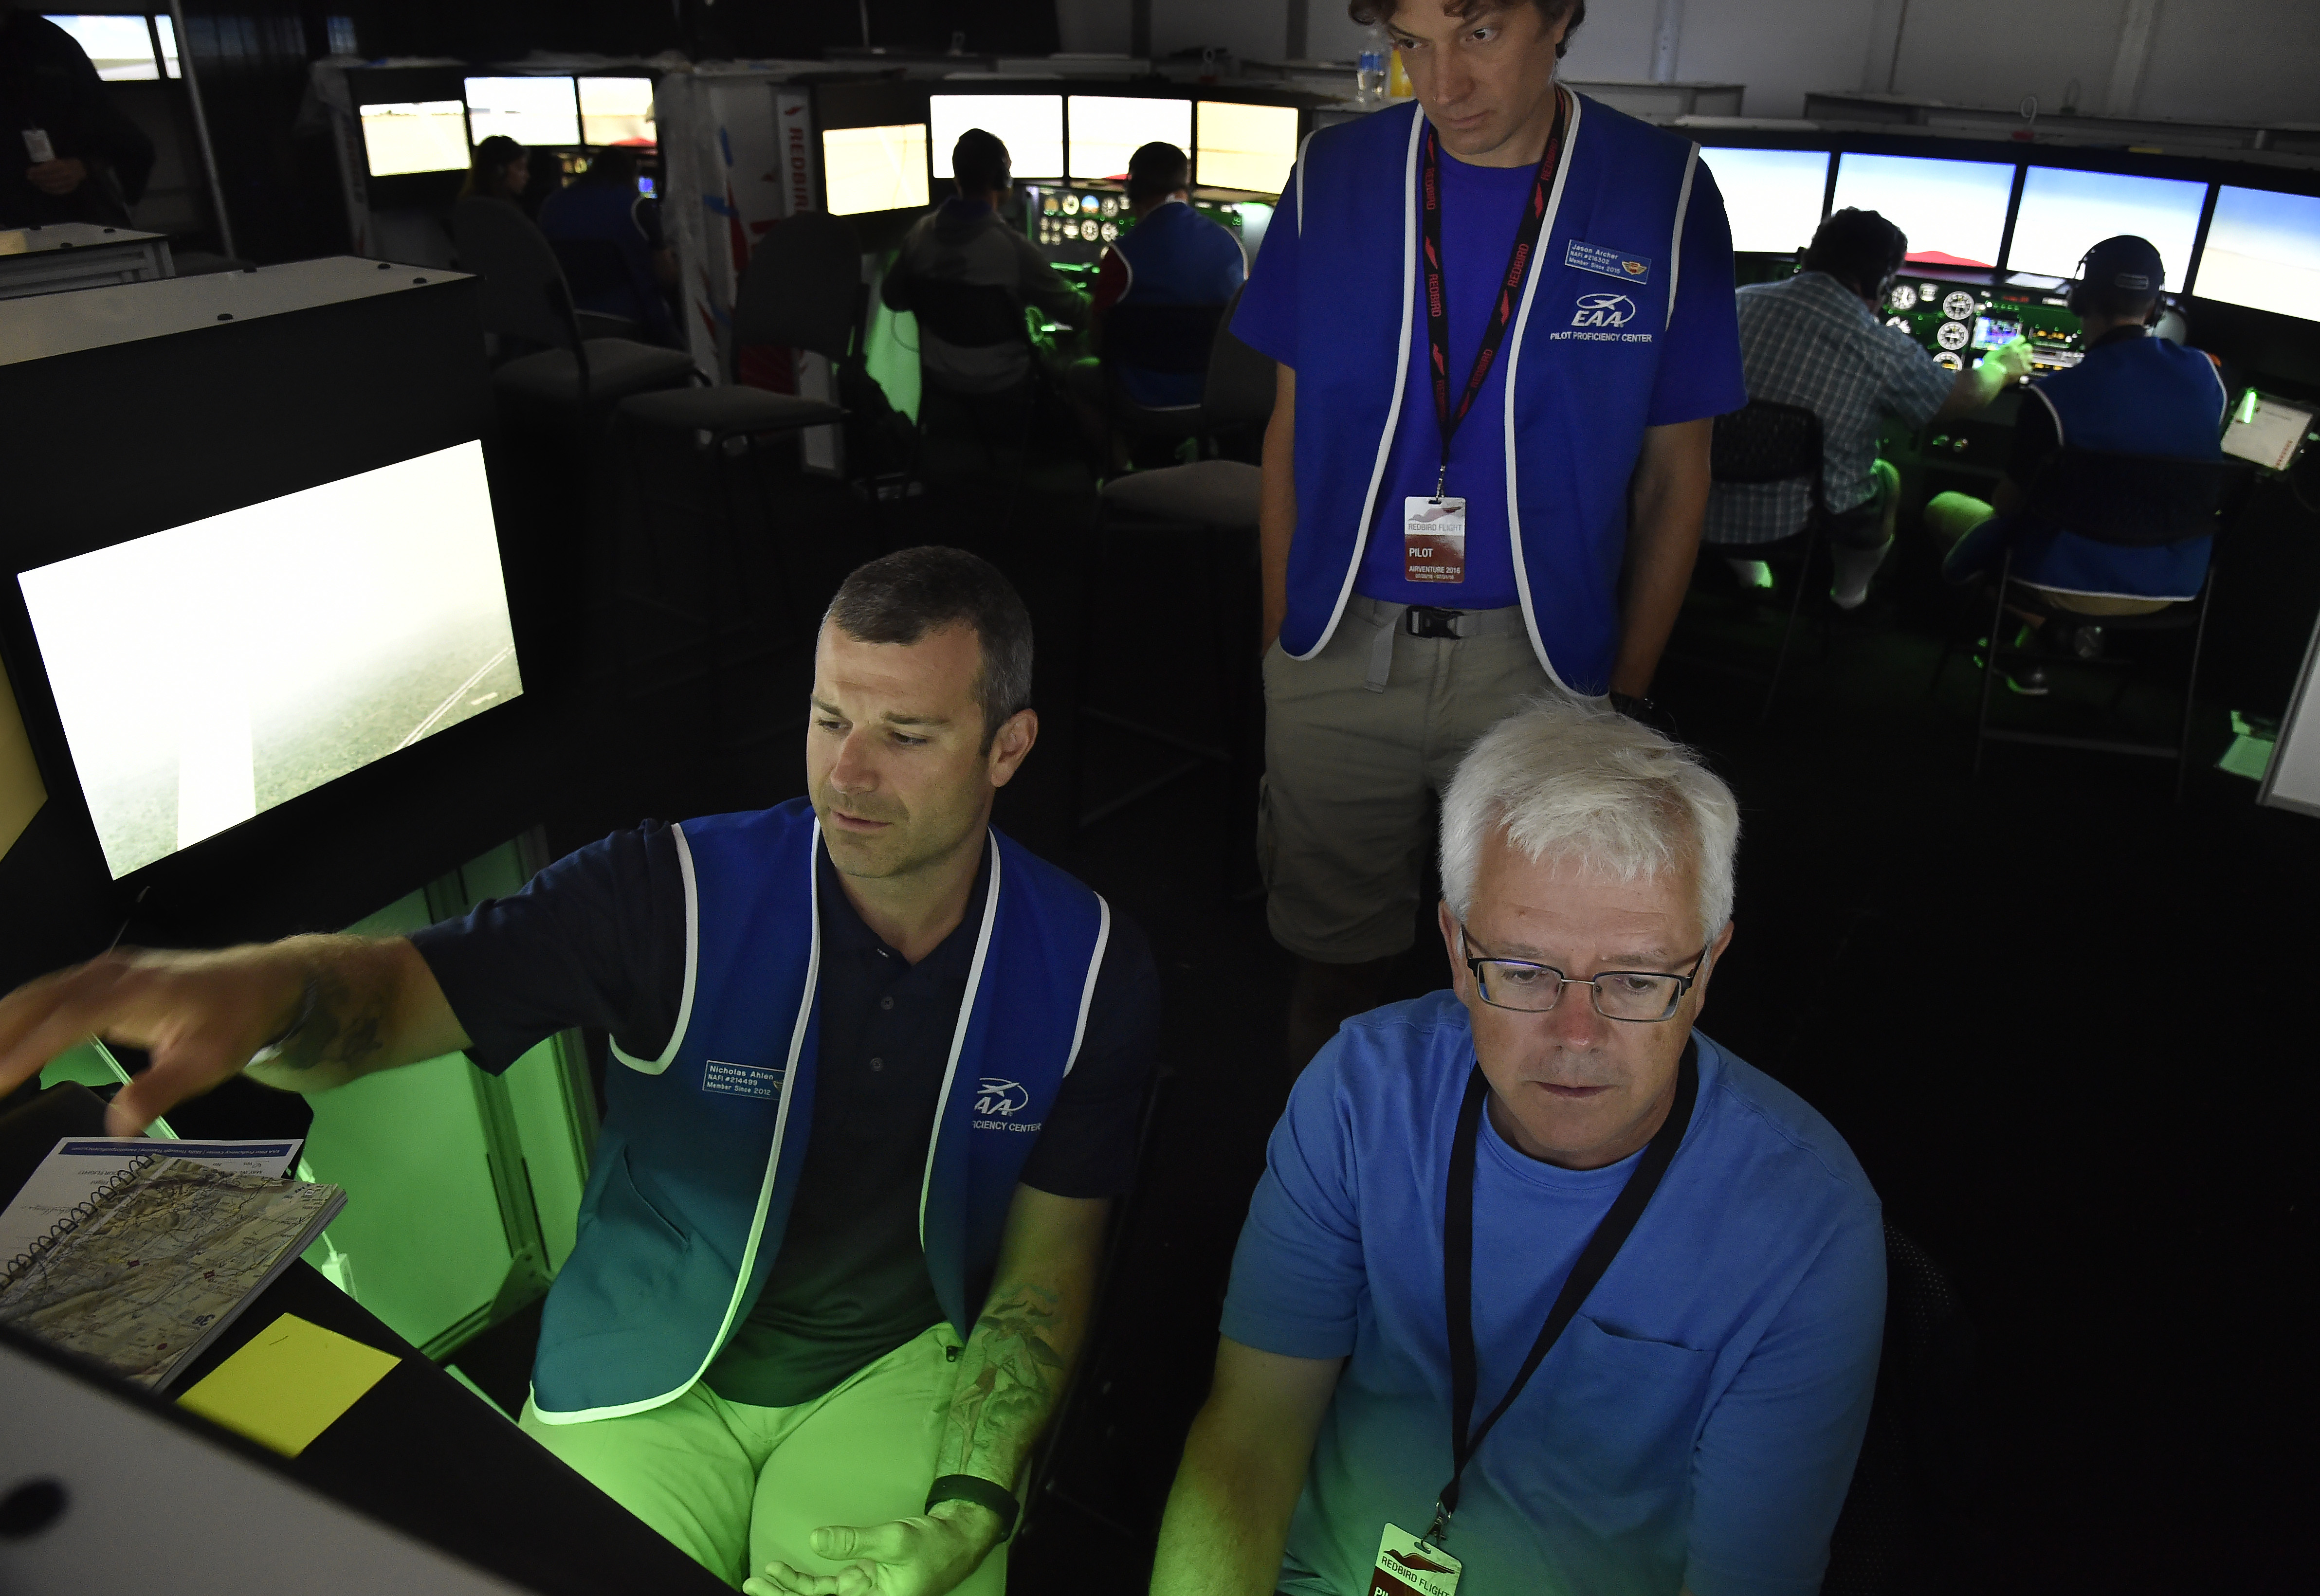 Flight instructor Jason Archer supervises pilots and other instructors at EAA AirVenture's popular Pilot Proficiency Center. Photo by David Tulis.